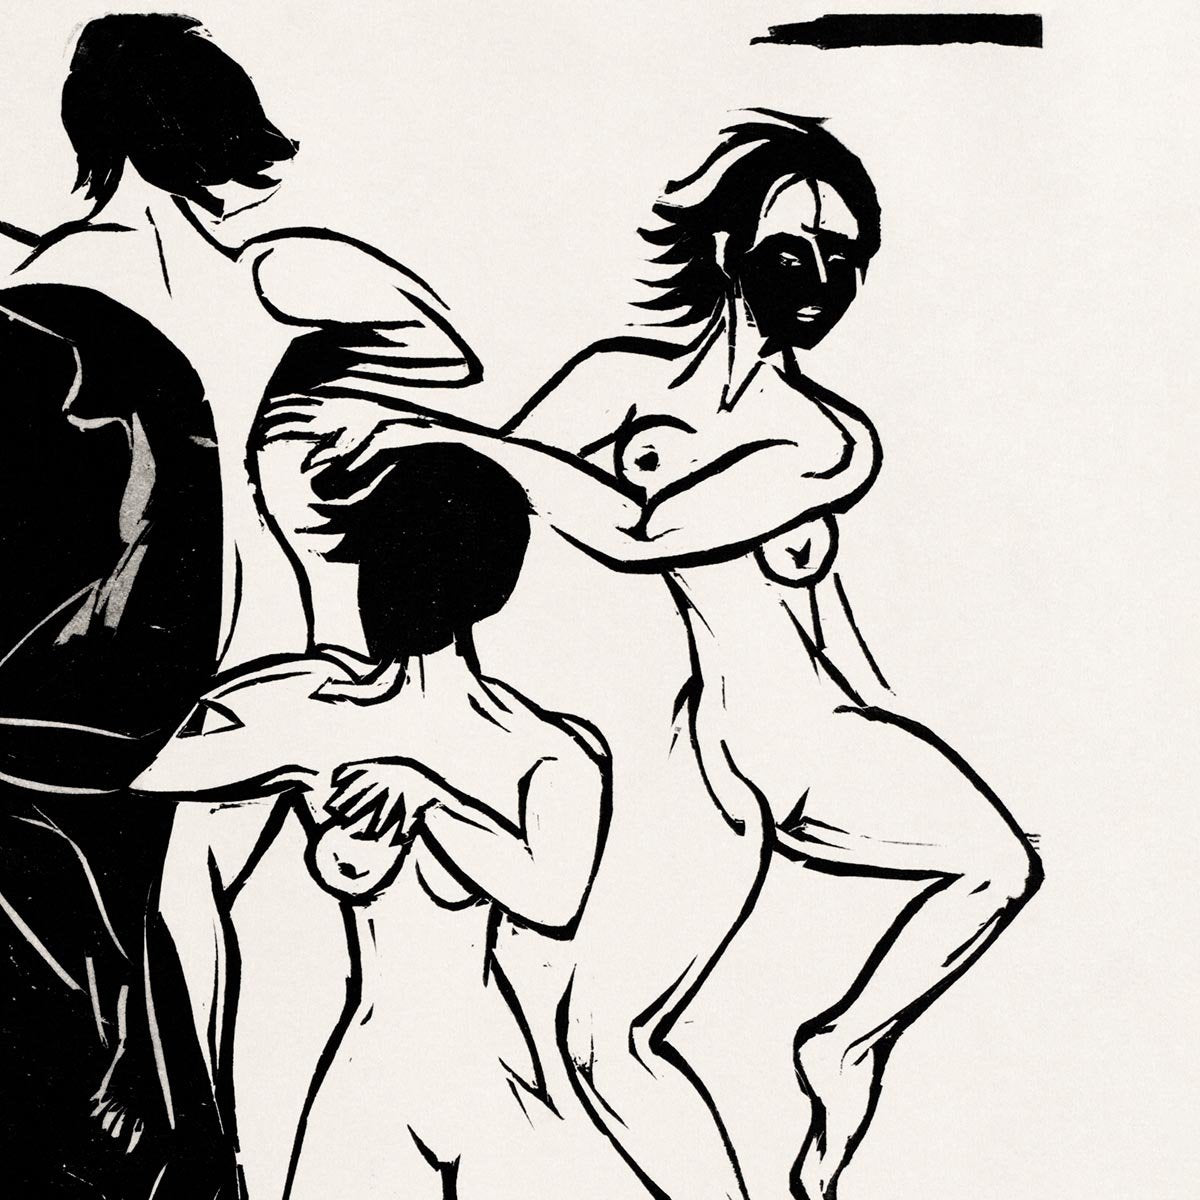 Nudes Dancing Around a Shadow by Ernst Kirchner